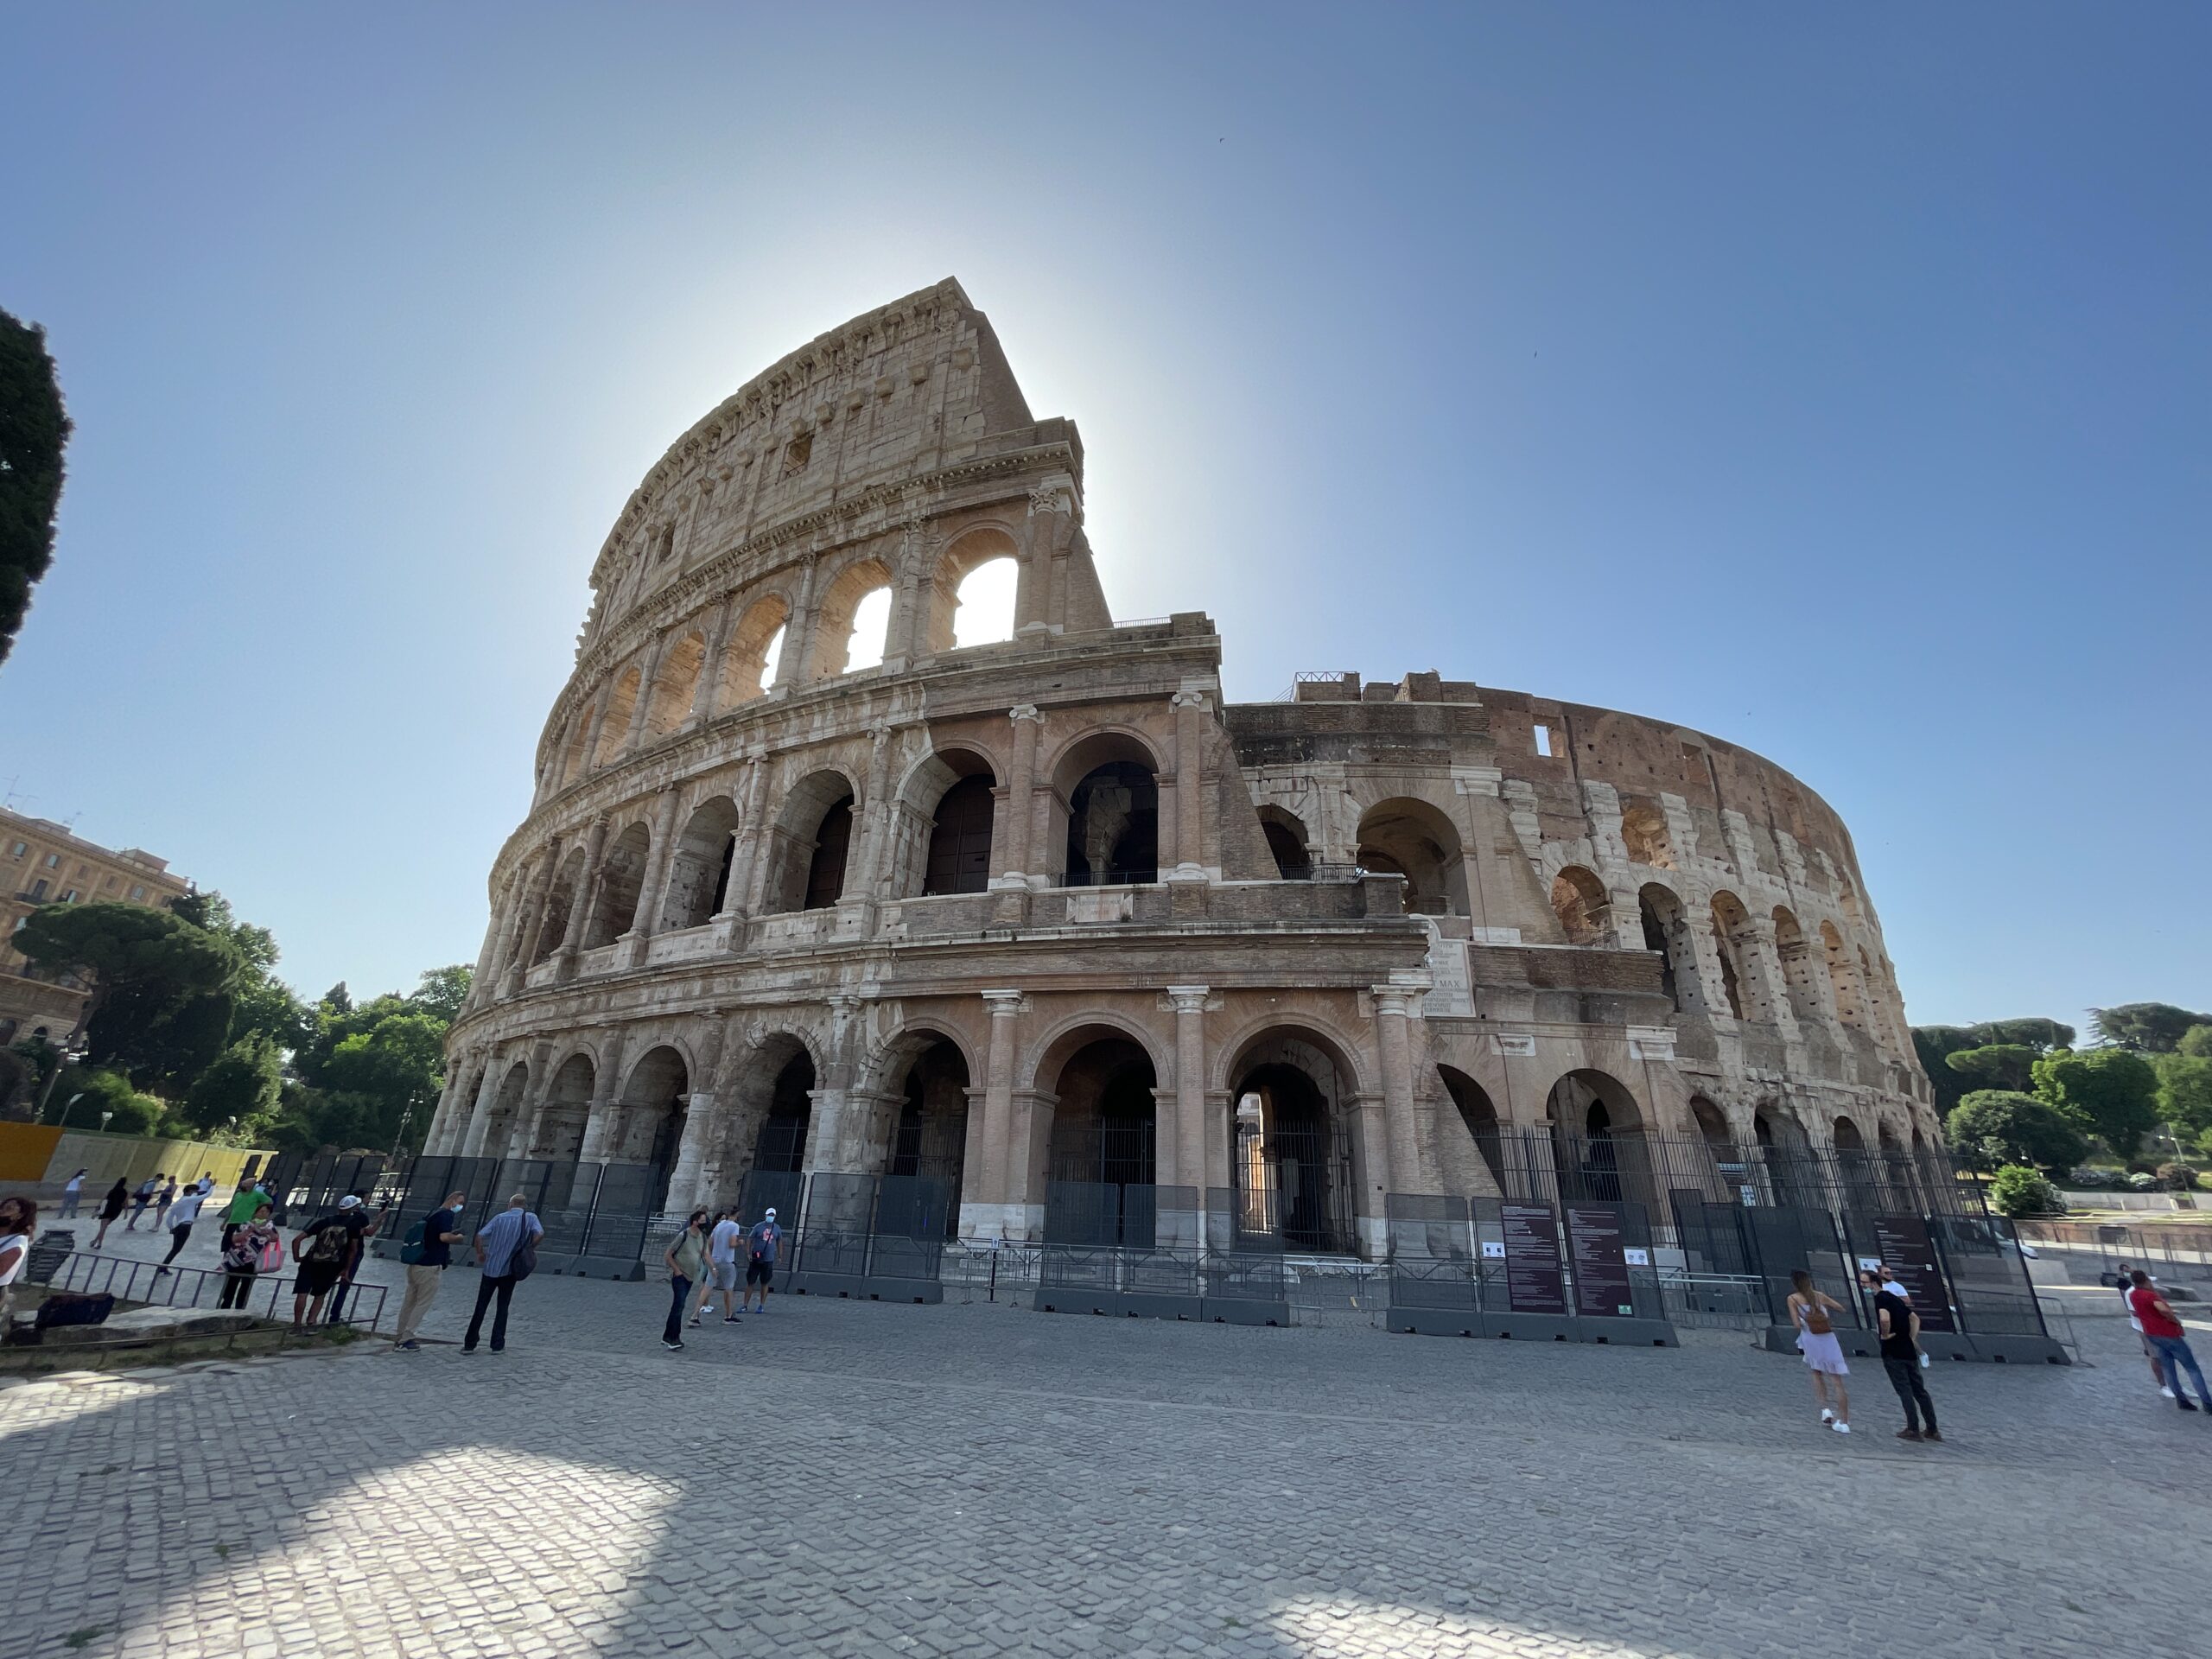 The Colosseum in the rising morning sun